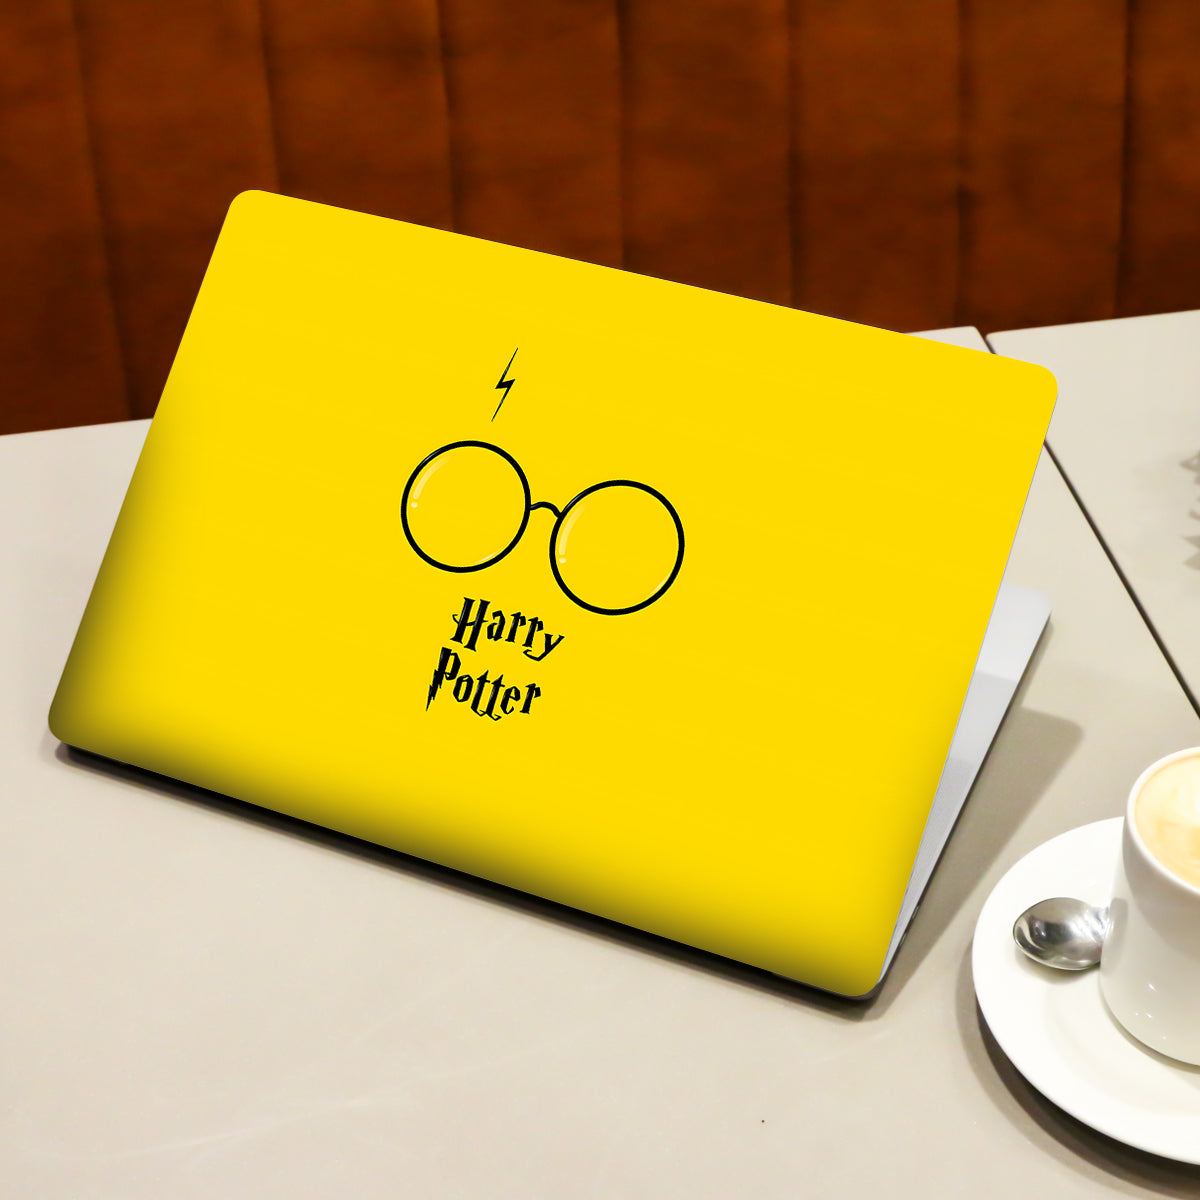 Harry Potter in Yellow Movies Laptop Skin